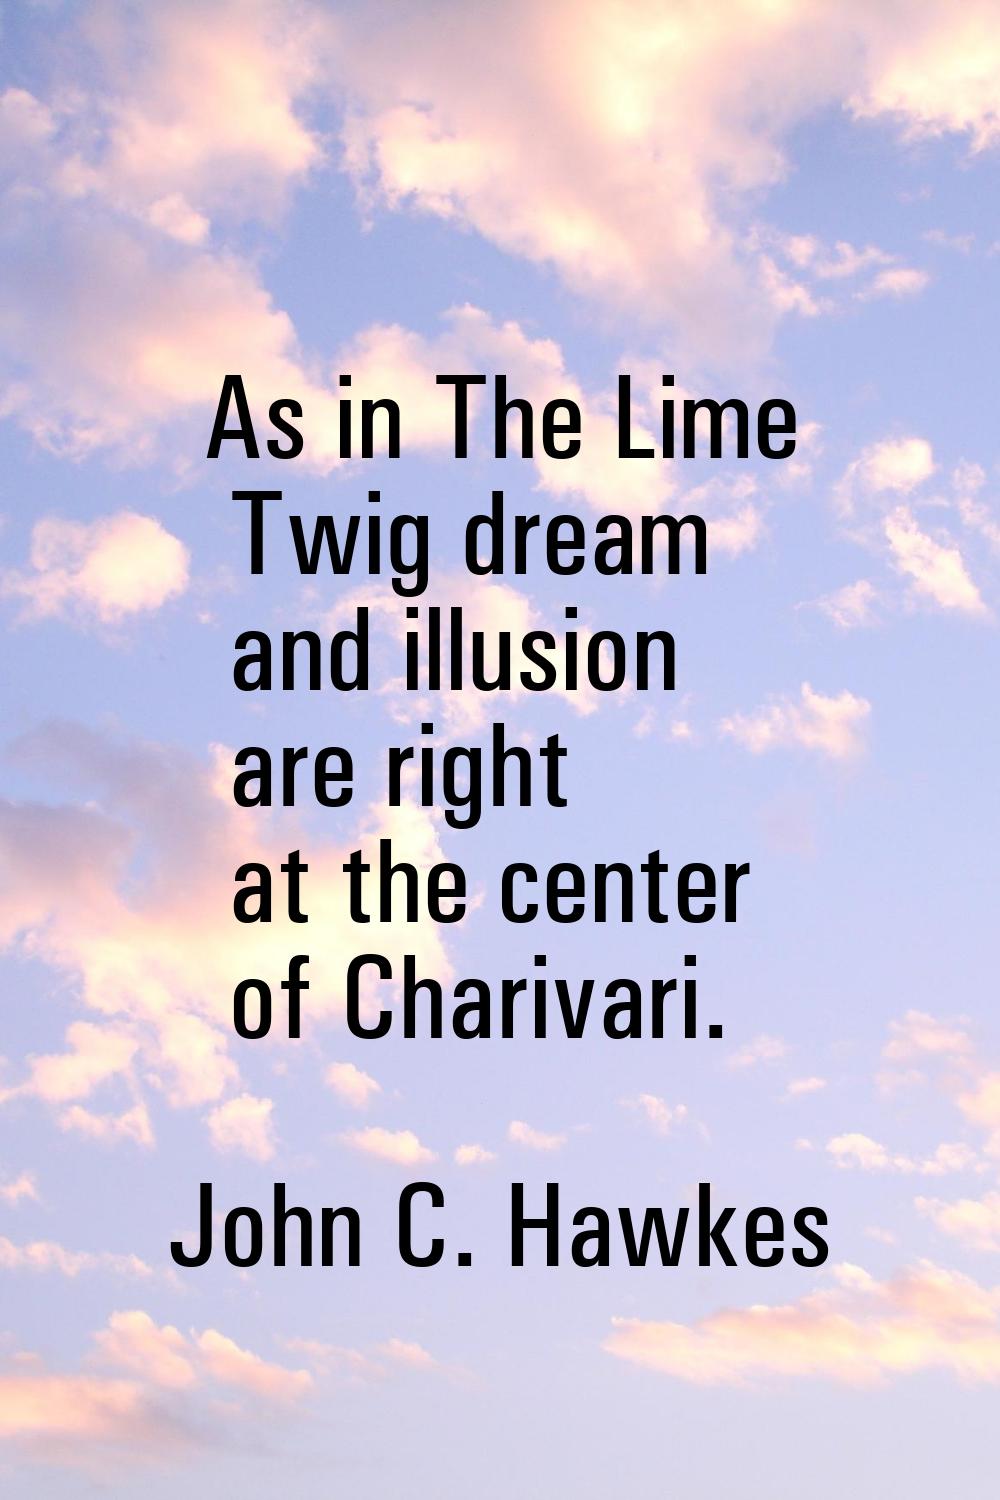 As in The Lime Twig dream and illusion are right at the center of Charivari.